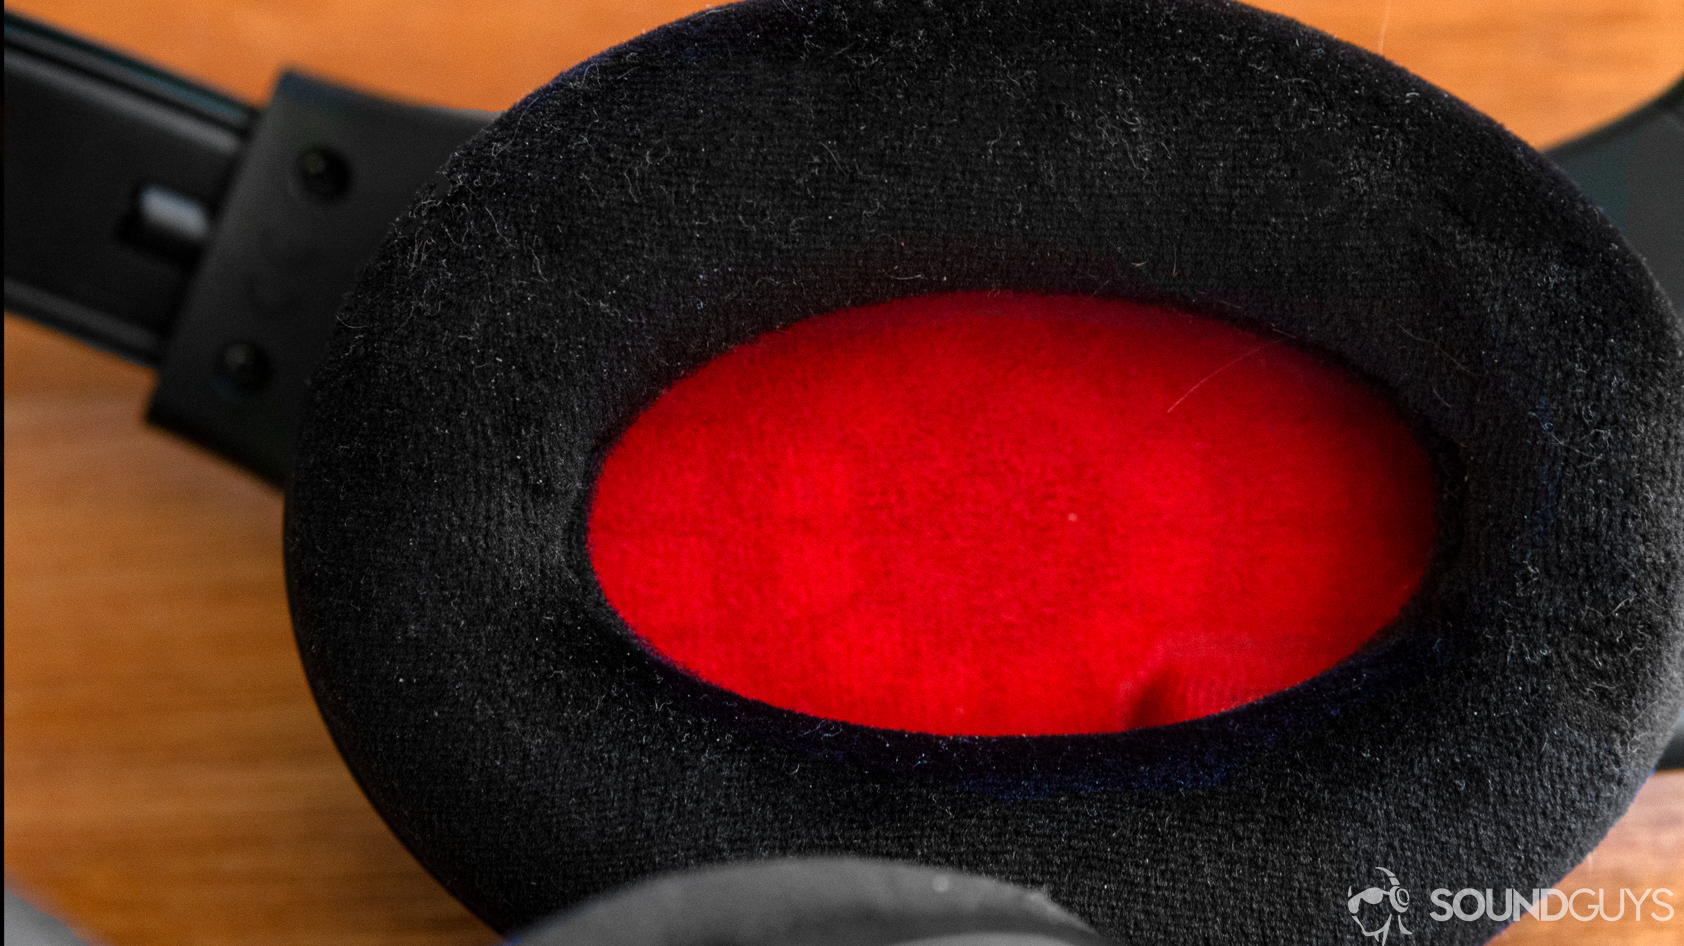 A photo of the red and black velour earpads of the Sennheiser Game One.